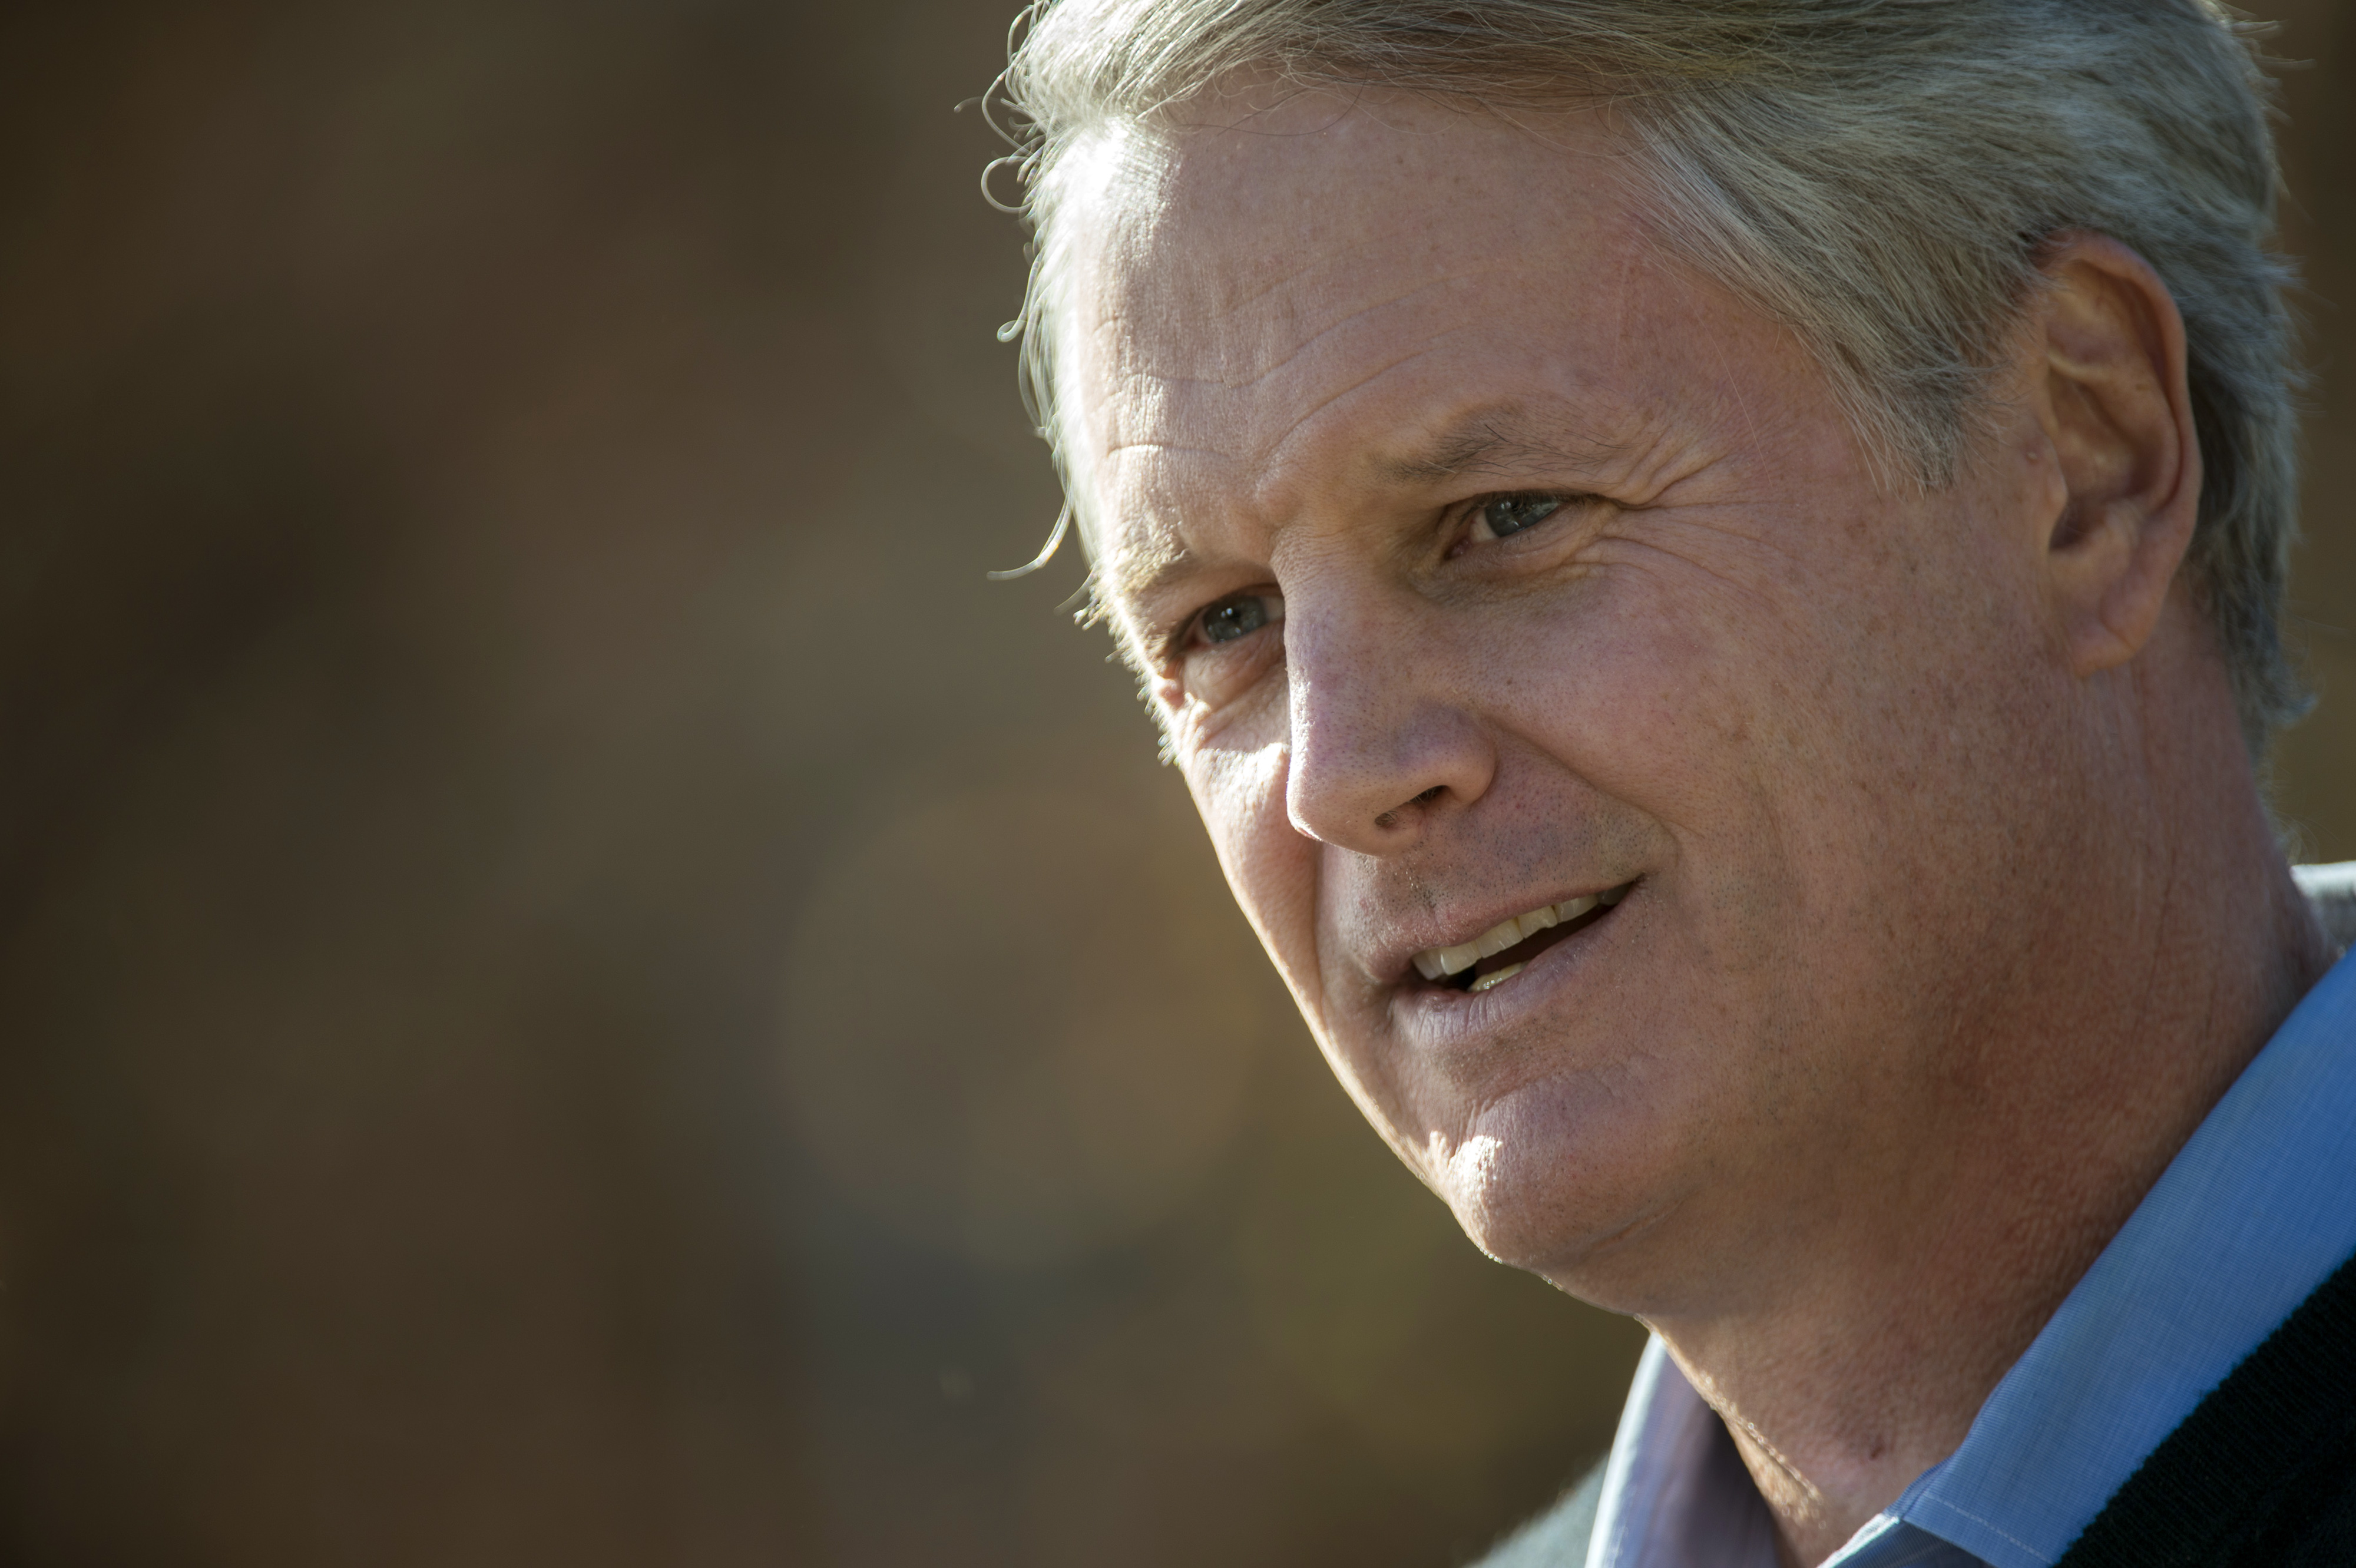 John Donahoe has been president and CEO of eBay since 2008. He's now guiding the company in a time of deep uncertainty: In early 2014, eBay settled a nasty public feud with activist investor Carl Icahn, who wants eBay to spin off payment service PayPal as an independent business — and Icahn isn't the only one who thinks that's a good idea.